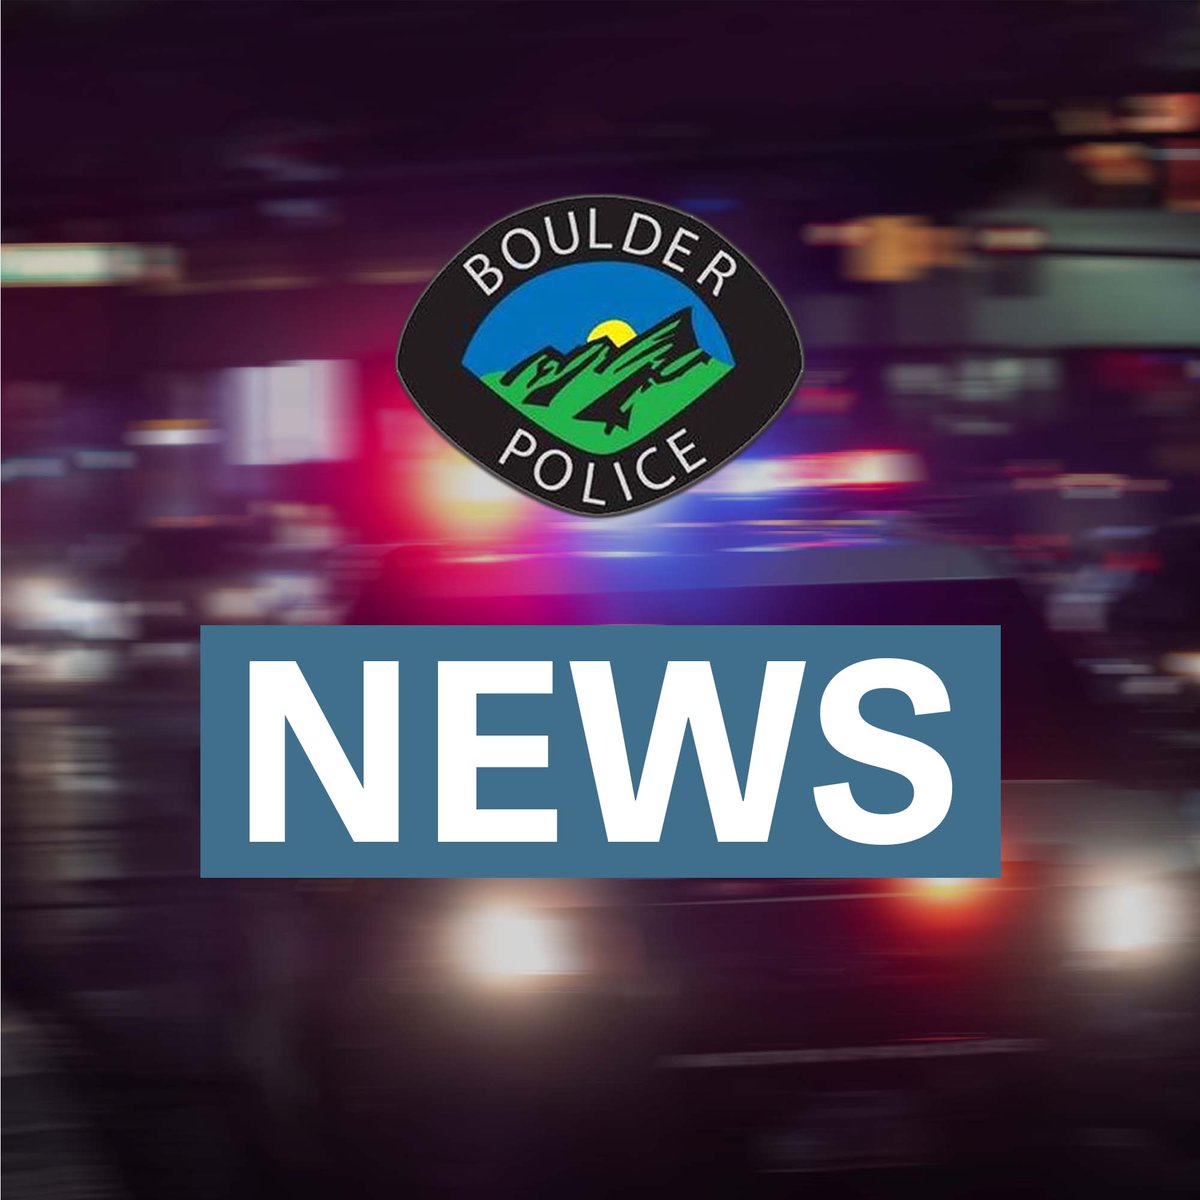 The Boulder Police Department is investigating a fatal car crash after a vehicle struck a child who later died at the hospital yesterday. At approximately 5:20 p.m. on Monday, May 13, officers were called to an apartment complex in the 700 block of 29th Street for a report of a